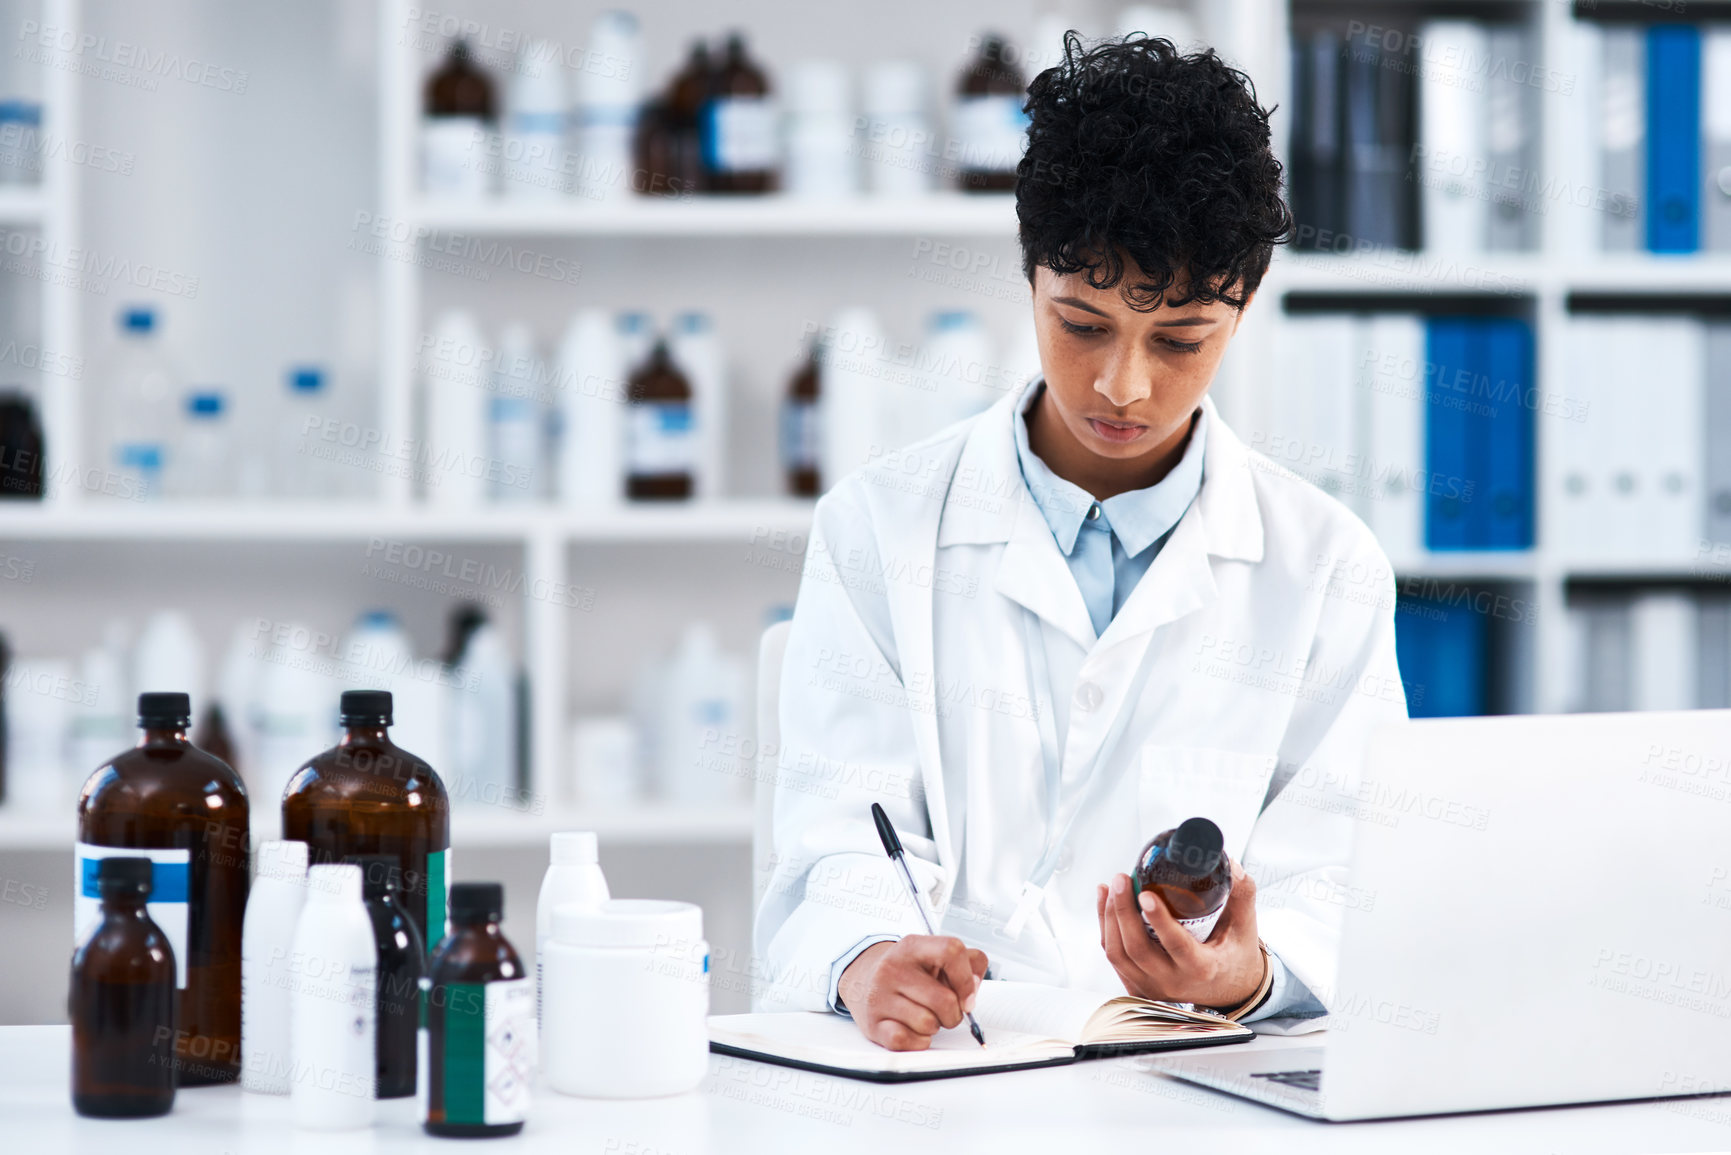 Buy stock photo Shot of a young scientist writing notes while working in a lab